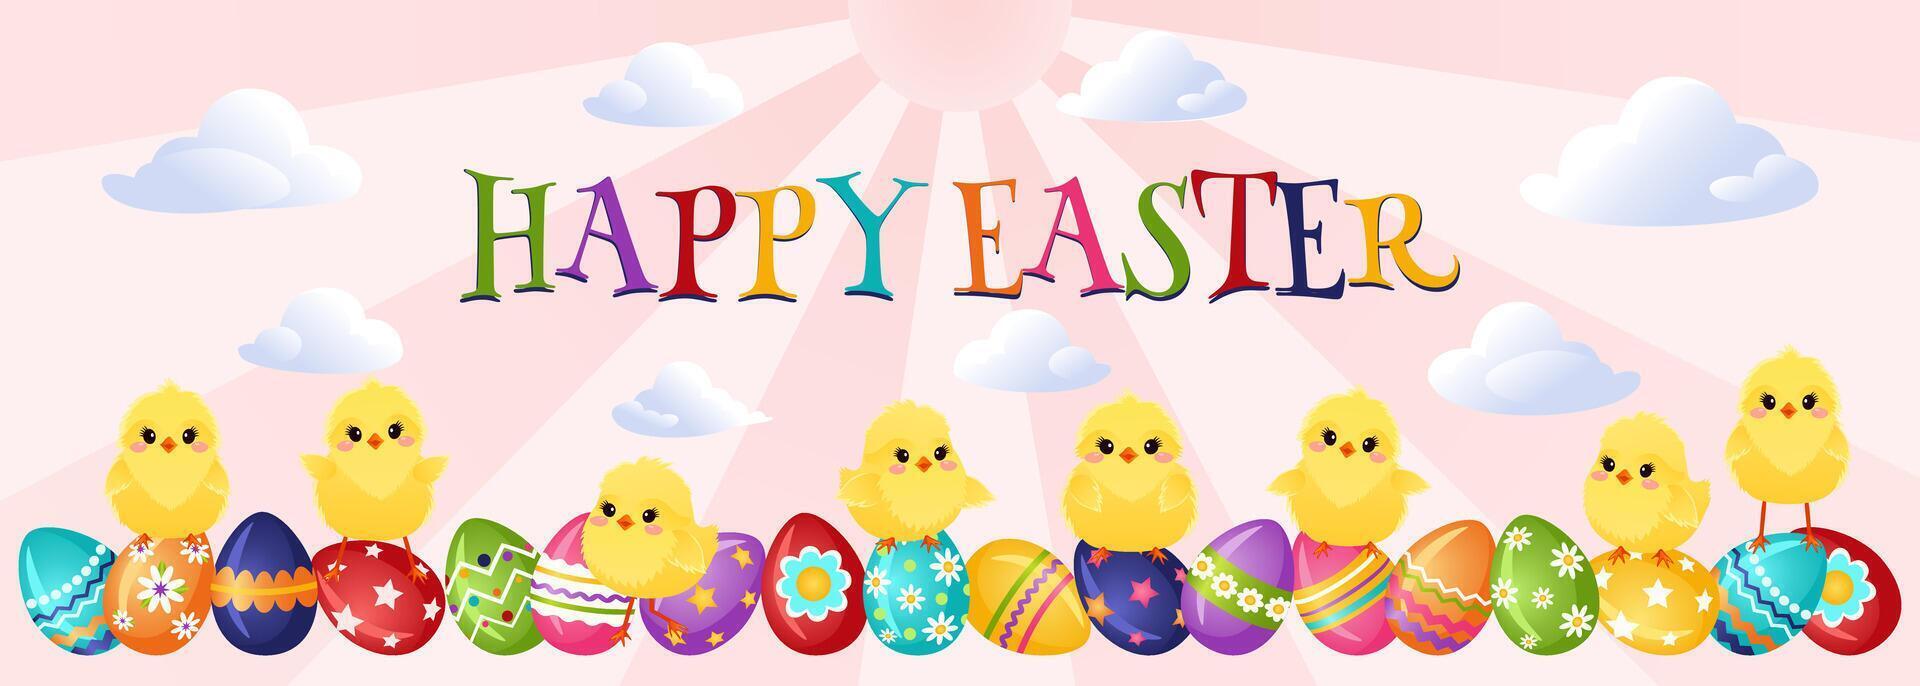 Easter background with eggs and funny chickens. Cute chickens stand on colorful painted eggs on a pink sunny background with clouds.Vector illustration. vector